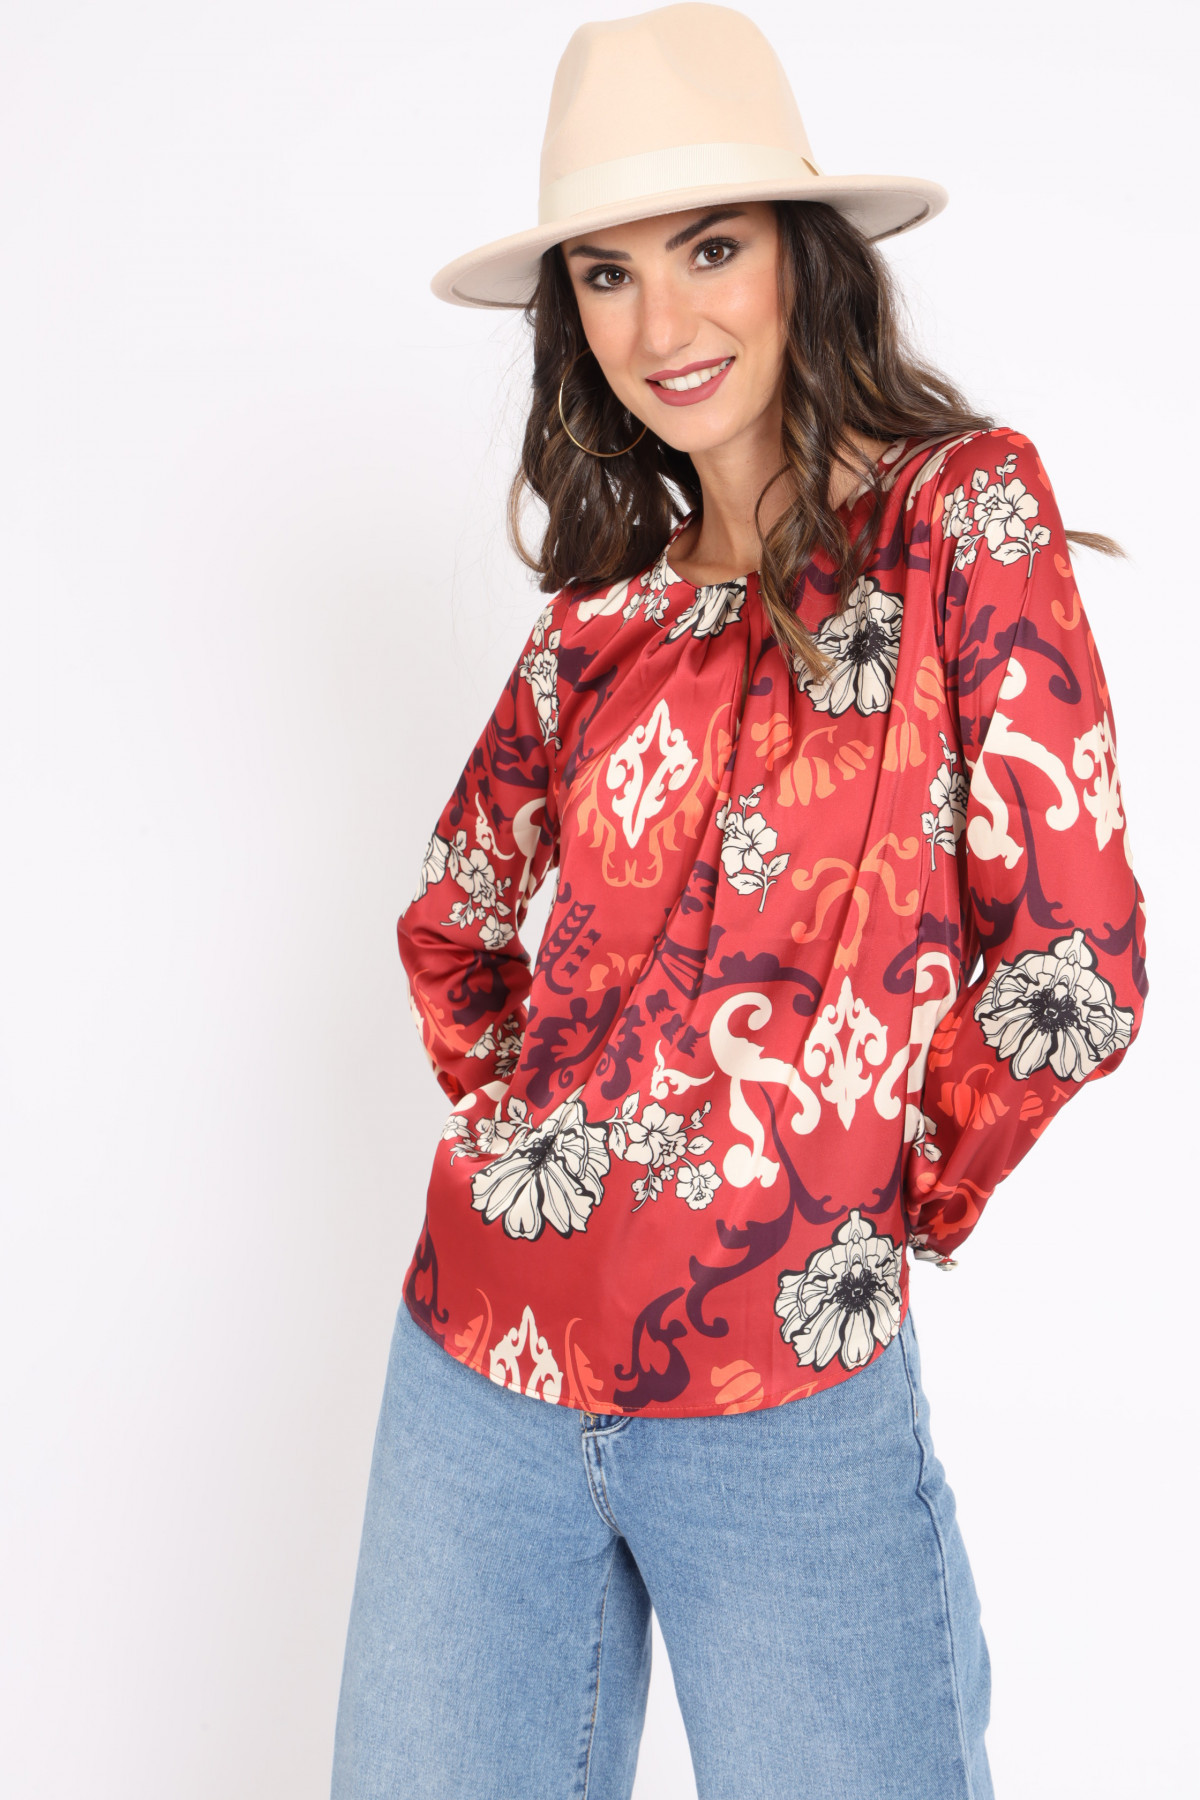 Satin Effect Blouse in Floral Fantasy Print